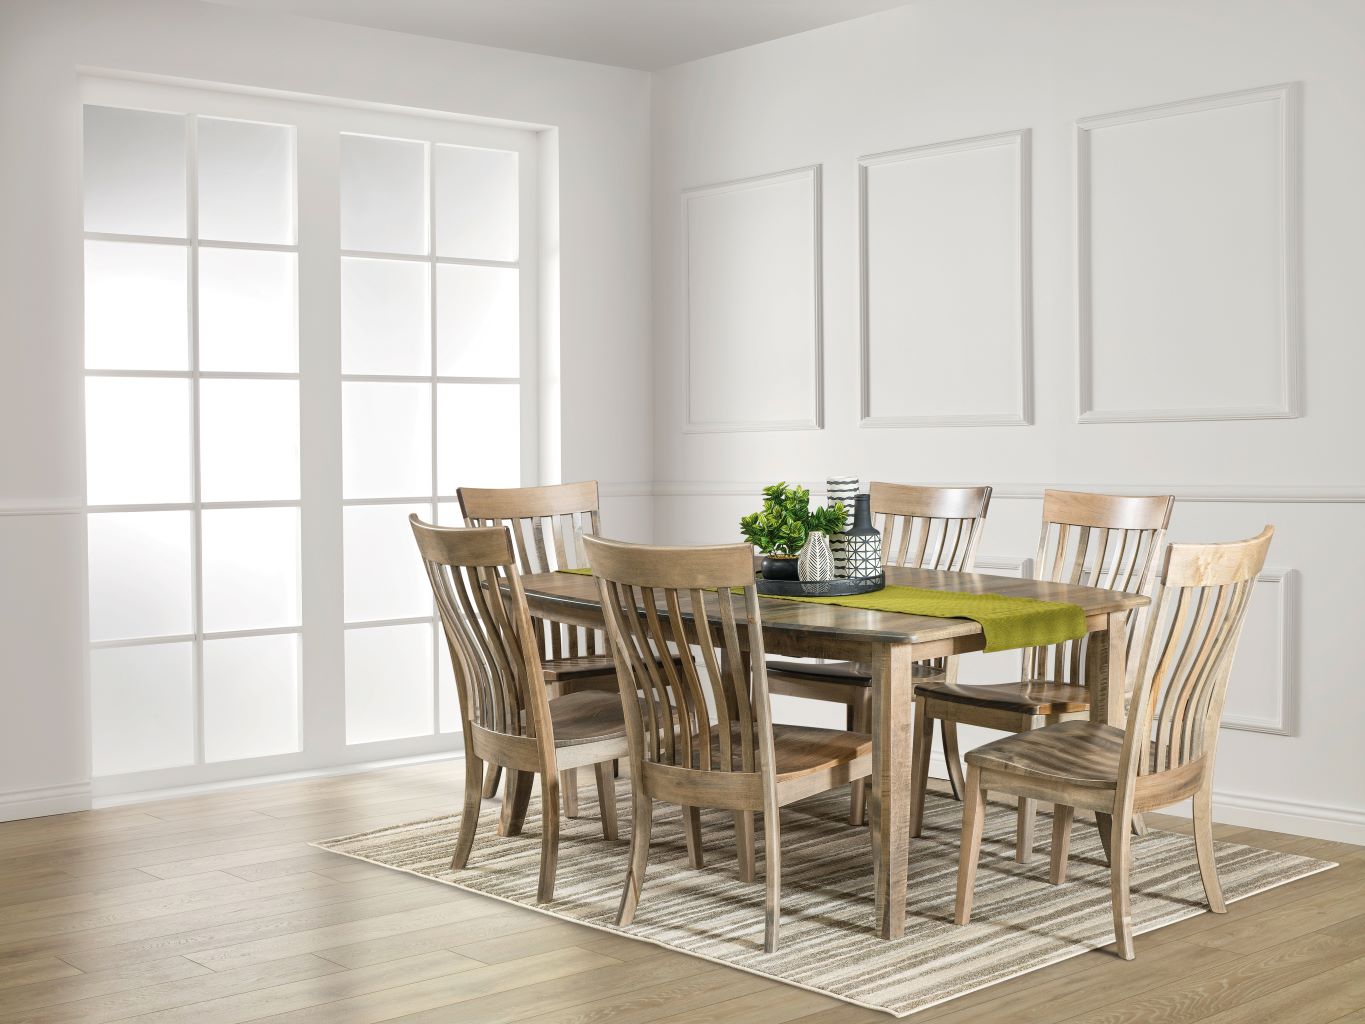 Gallery Dining Collection